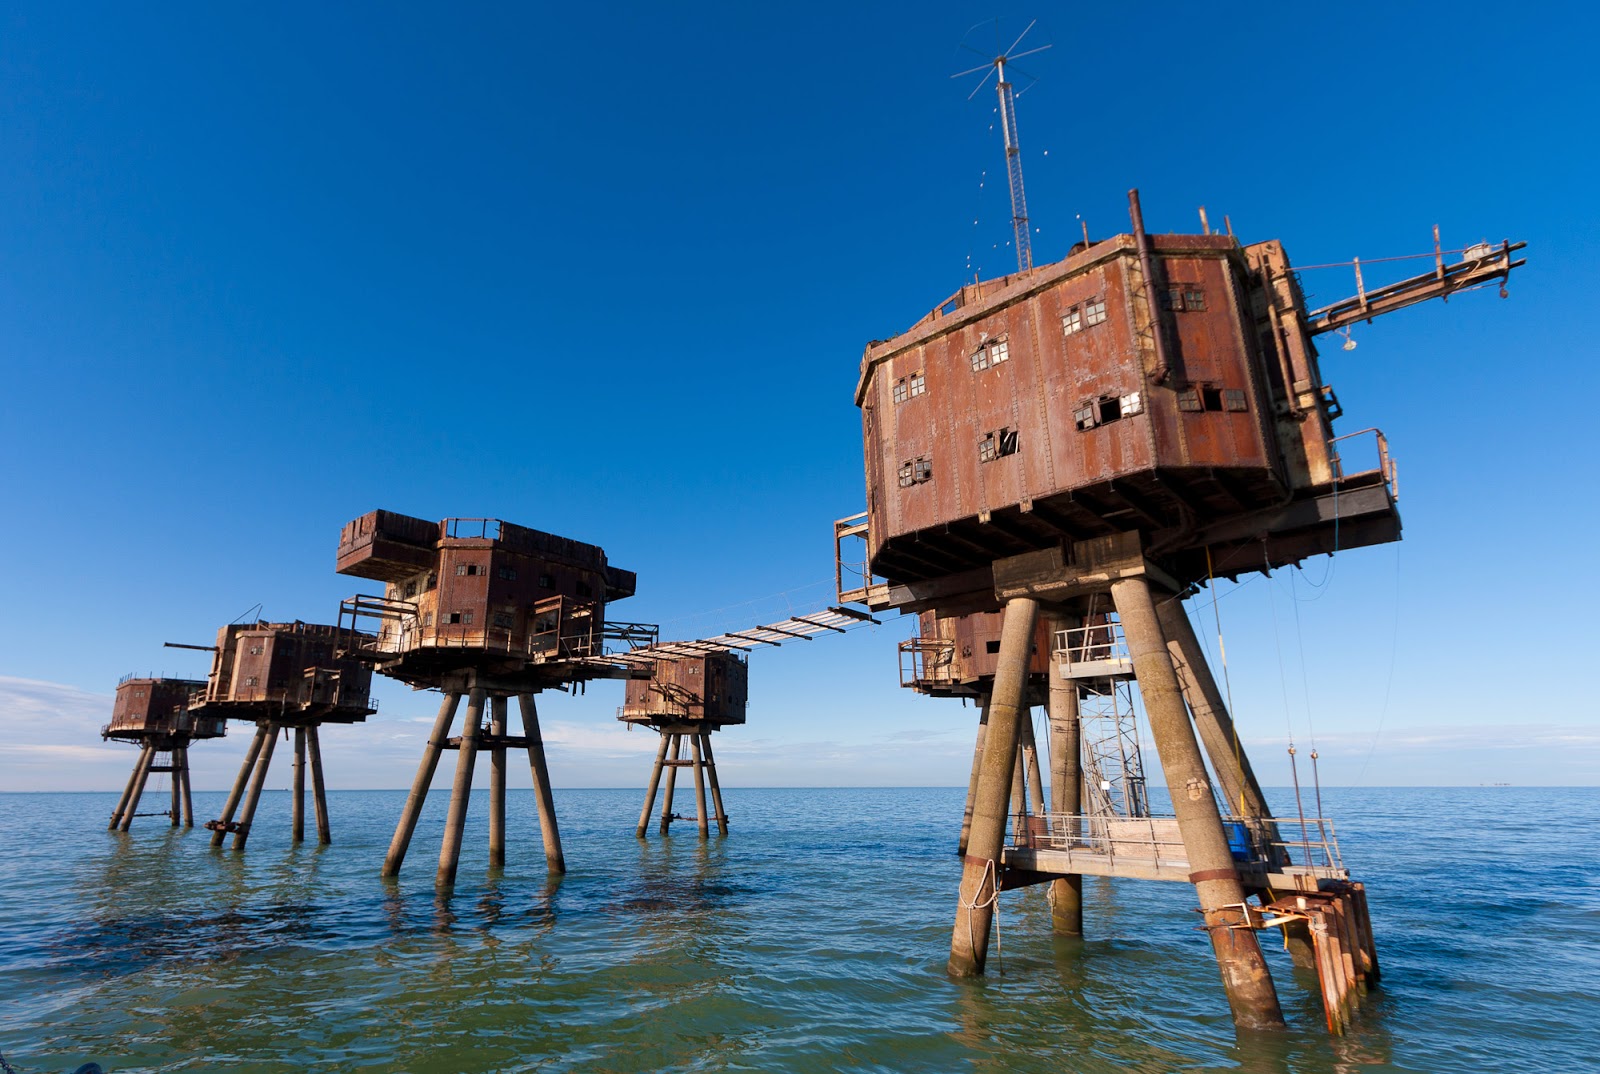 Deserted Places: Maunsell Forts: The abandoned sea forts ...